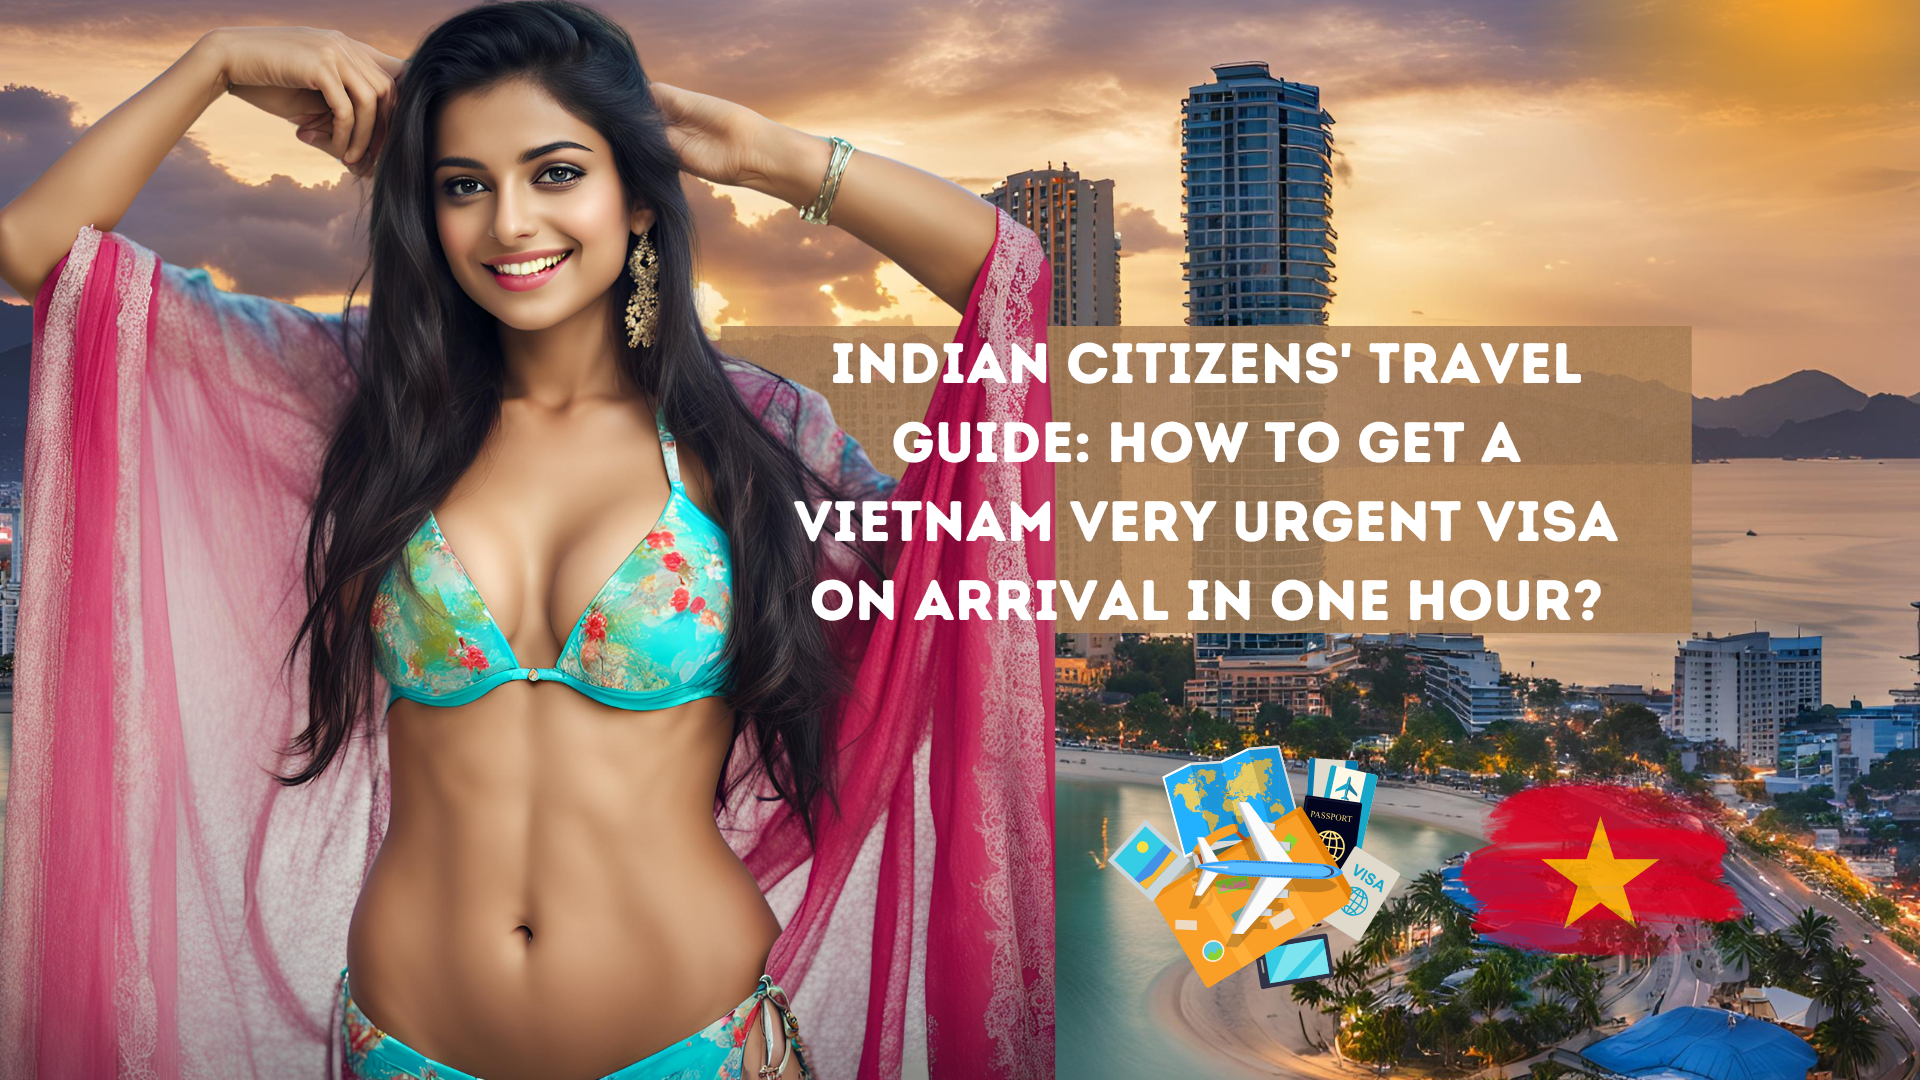 Indian Citizens' Travel Guide: How to Get a Vietnam Very Urgent Visa on Arrival in One Hour?